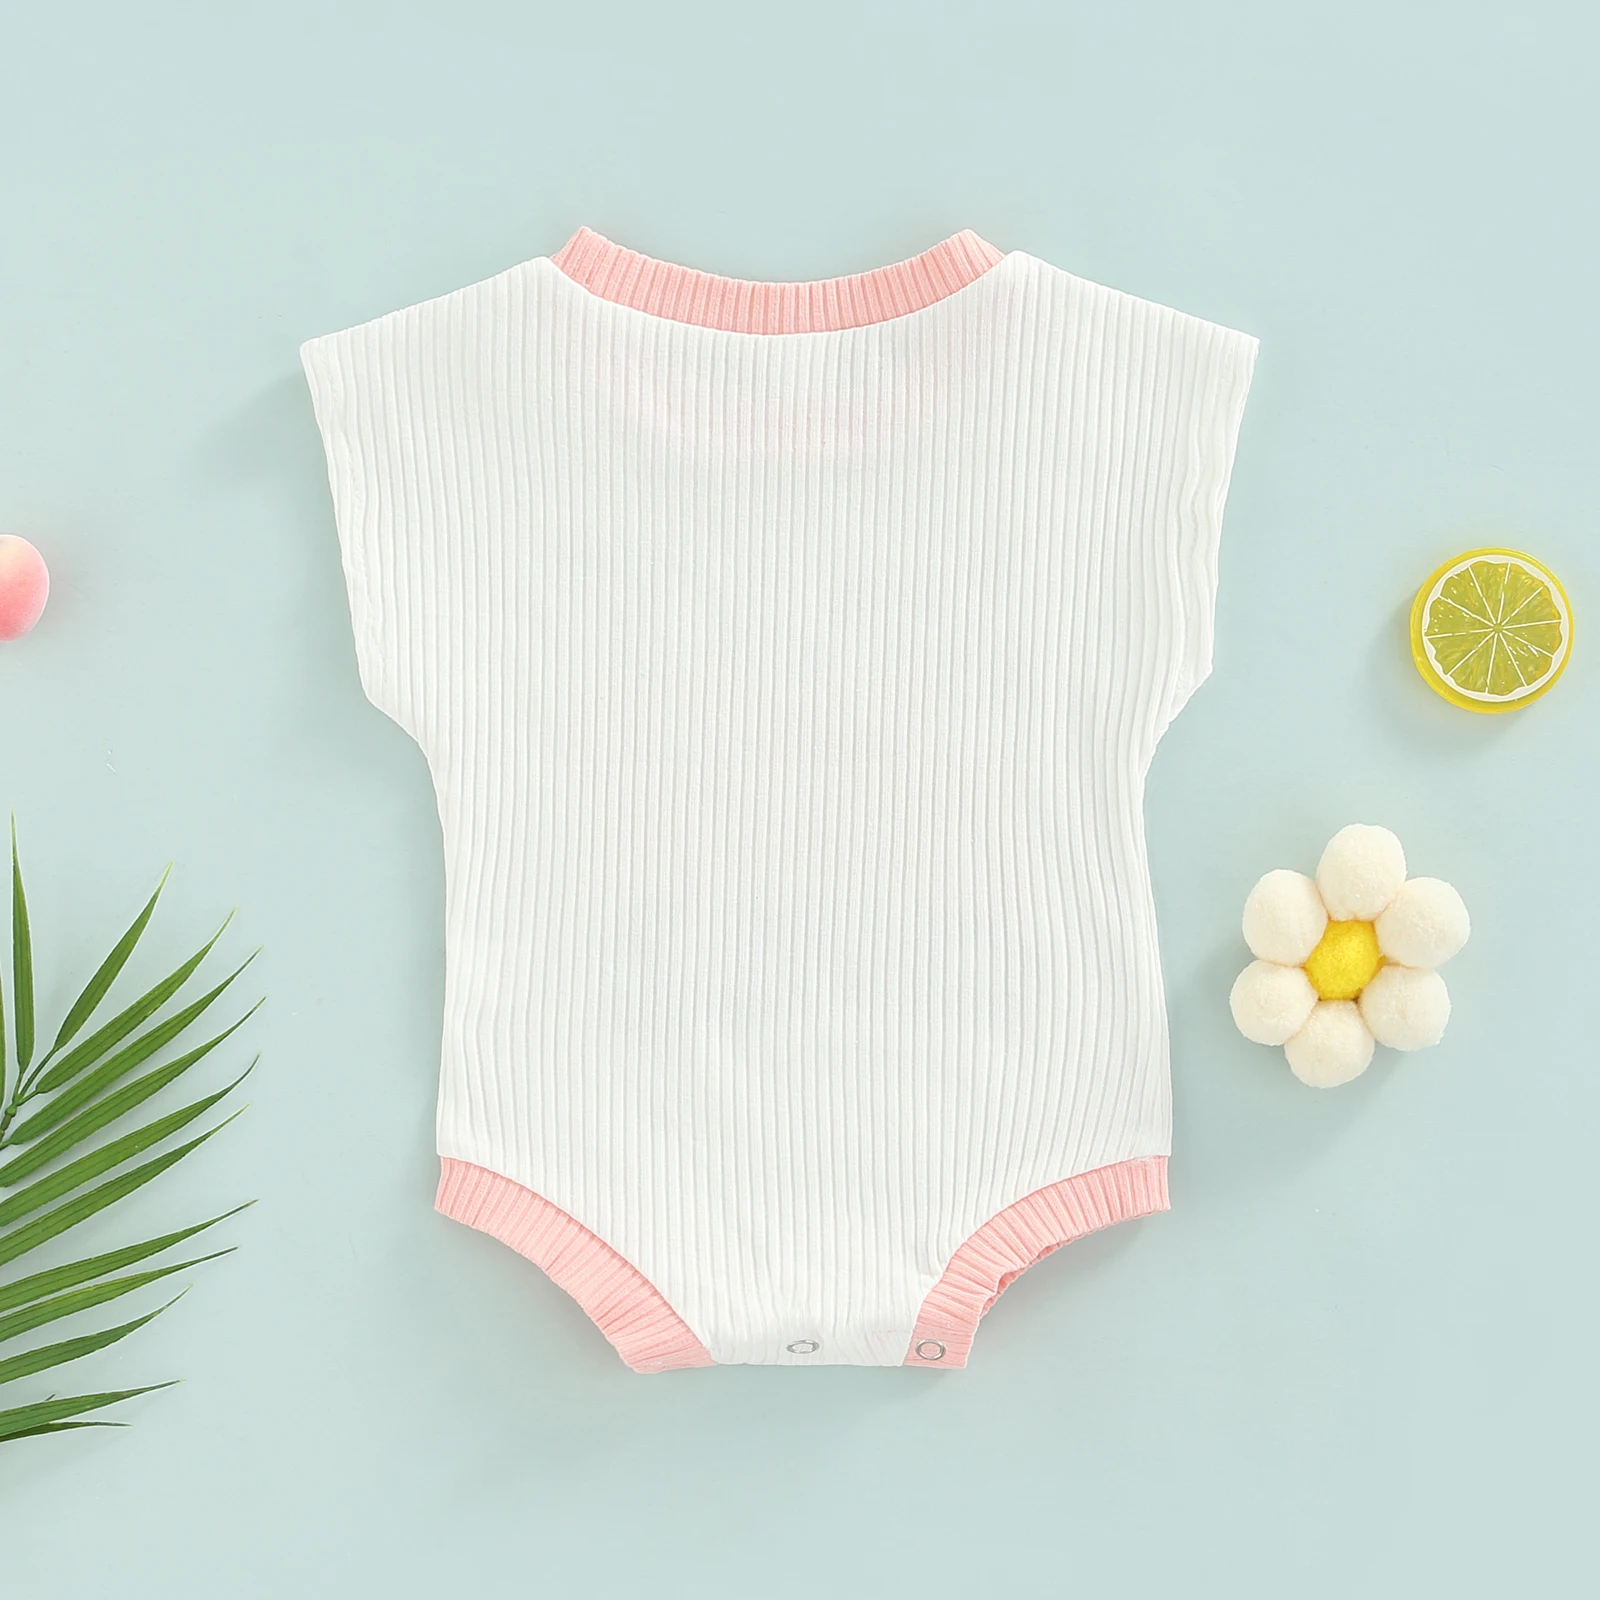 2022 0-18M Summer Infant Romper Baby Girls Leisure Style Creative Colorful Letter Flower Print Sleeveless Round Collar Jumpsuit Baby Bodysuits cheap